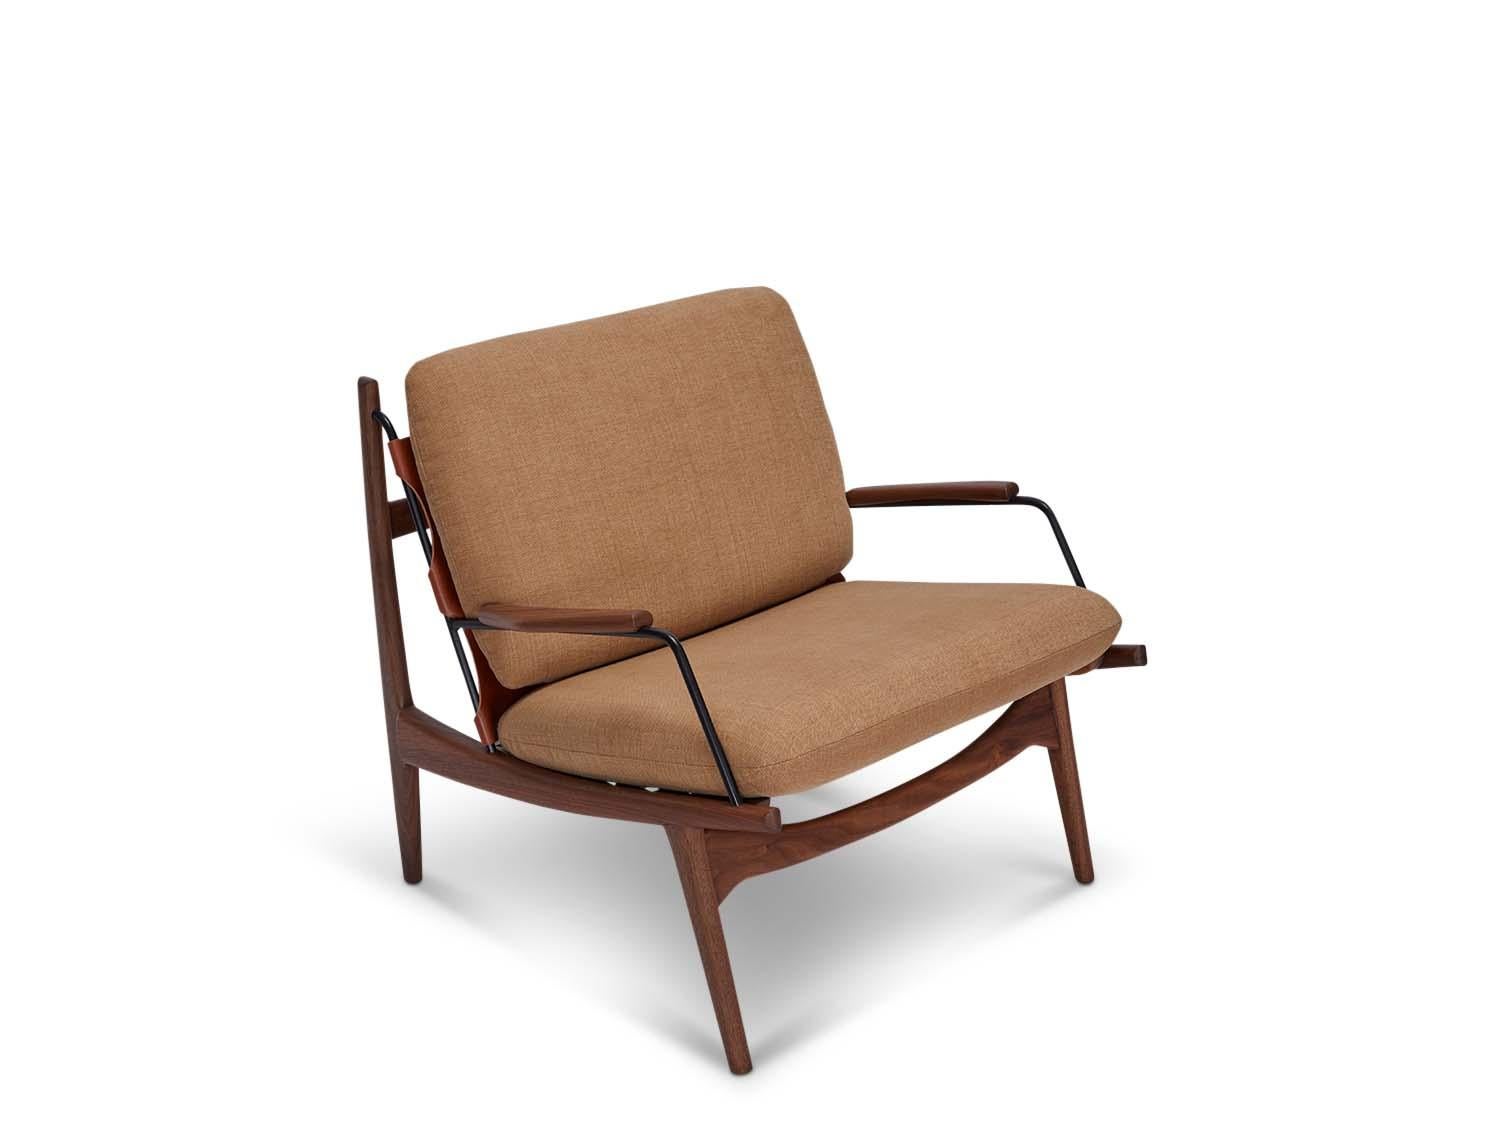 Maker’s armchair by Lawson-Fenning. The Maker's Armchair is a solid walnut or oak frame chair with a leather sling that features brass details on the seat and back. Loose seat and back cushions are included. A matching ottoman is also